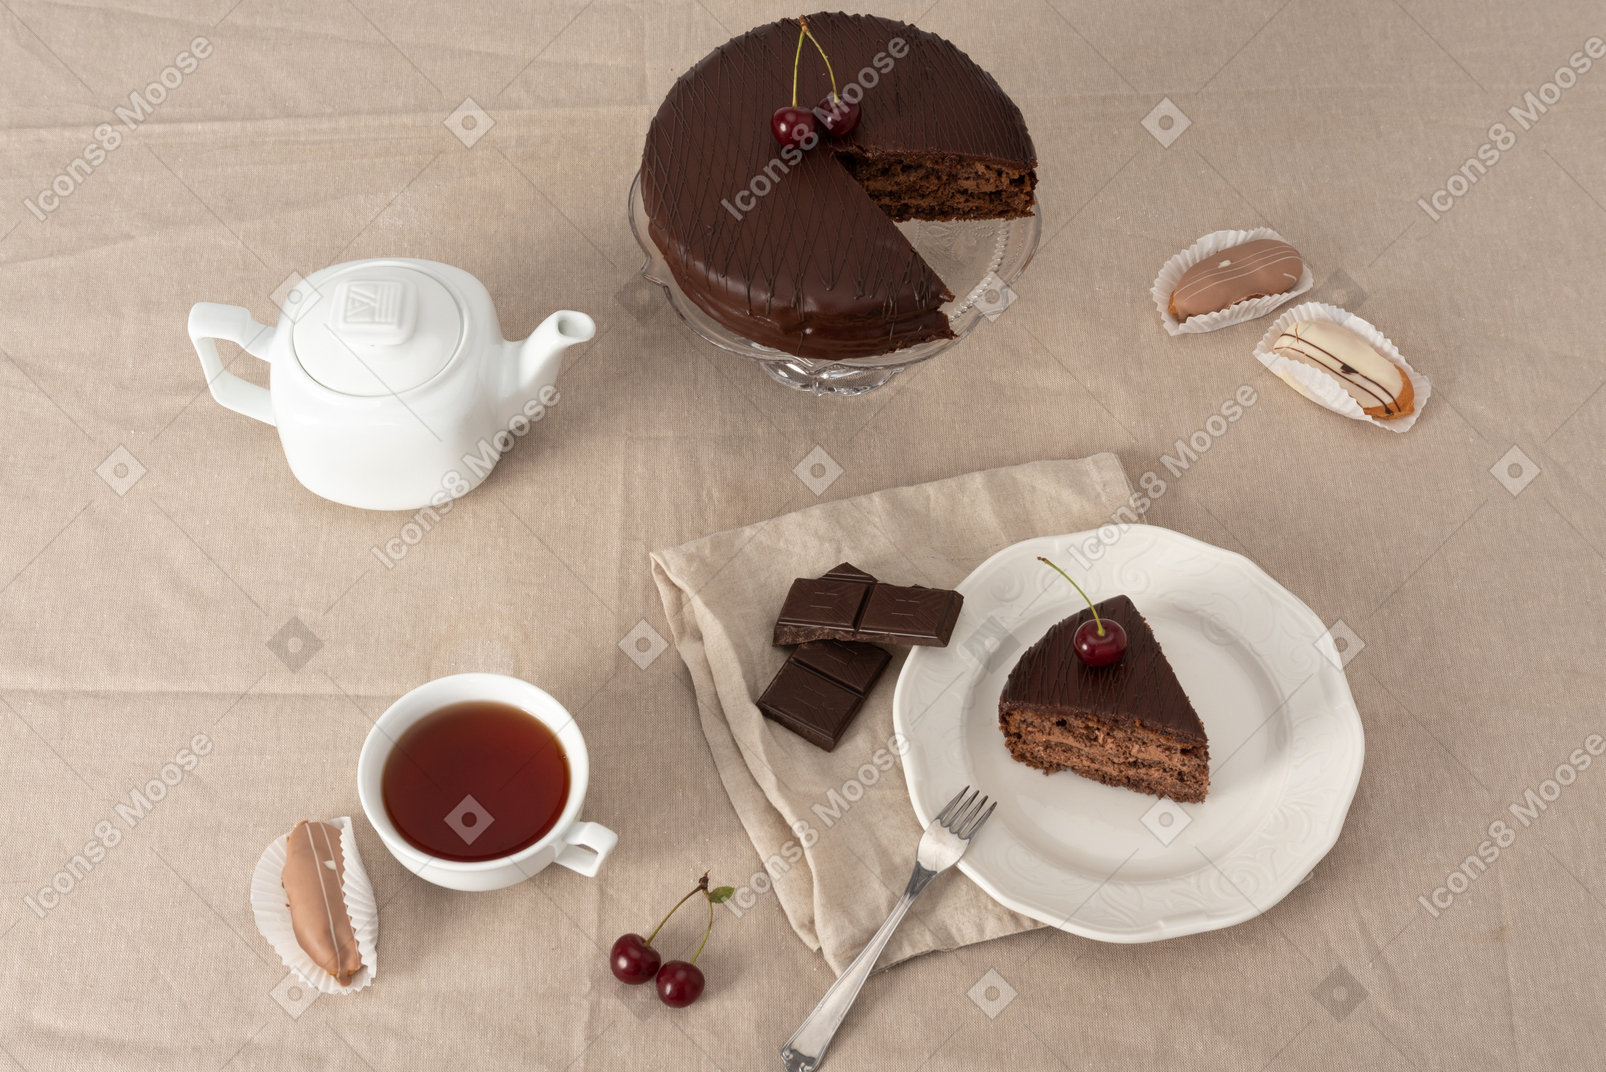 Chocolate cake on cake stand, teapot, cup of tea and piece of cake on the plate